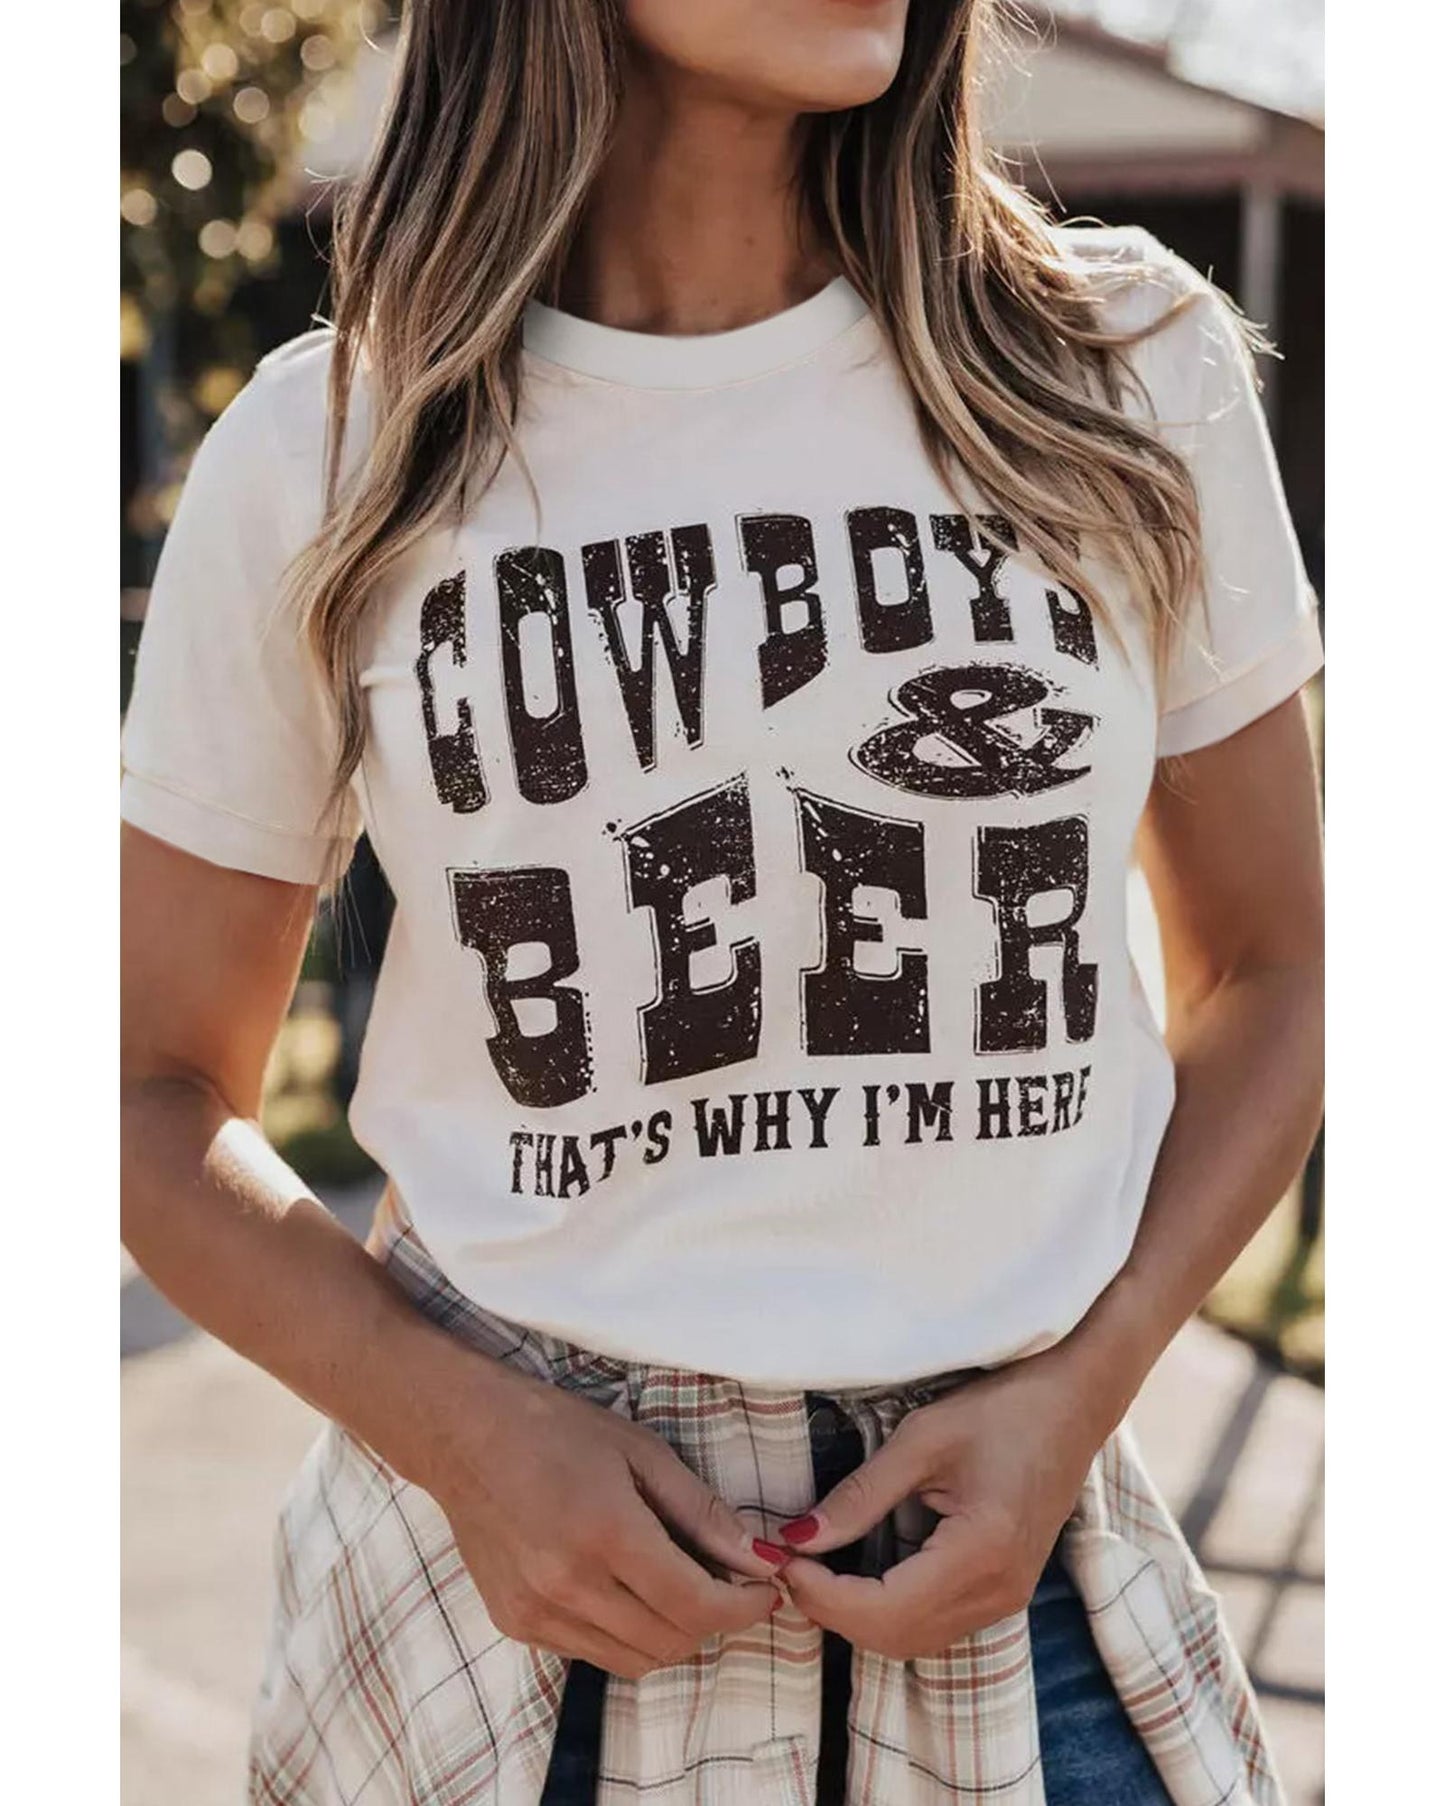 Azura Exchange COW BOYS & BEERS Letters Graphic T-shirt - S